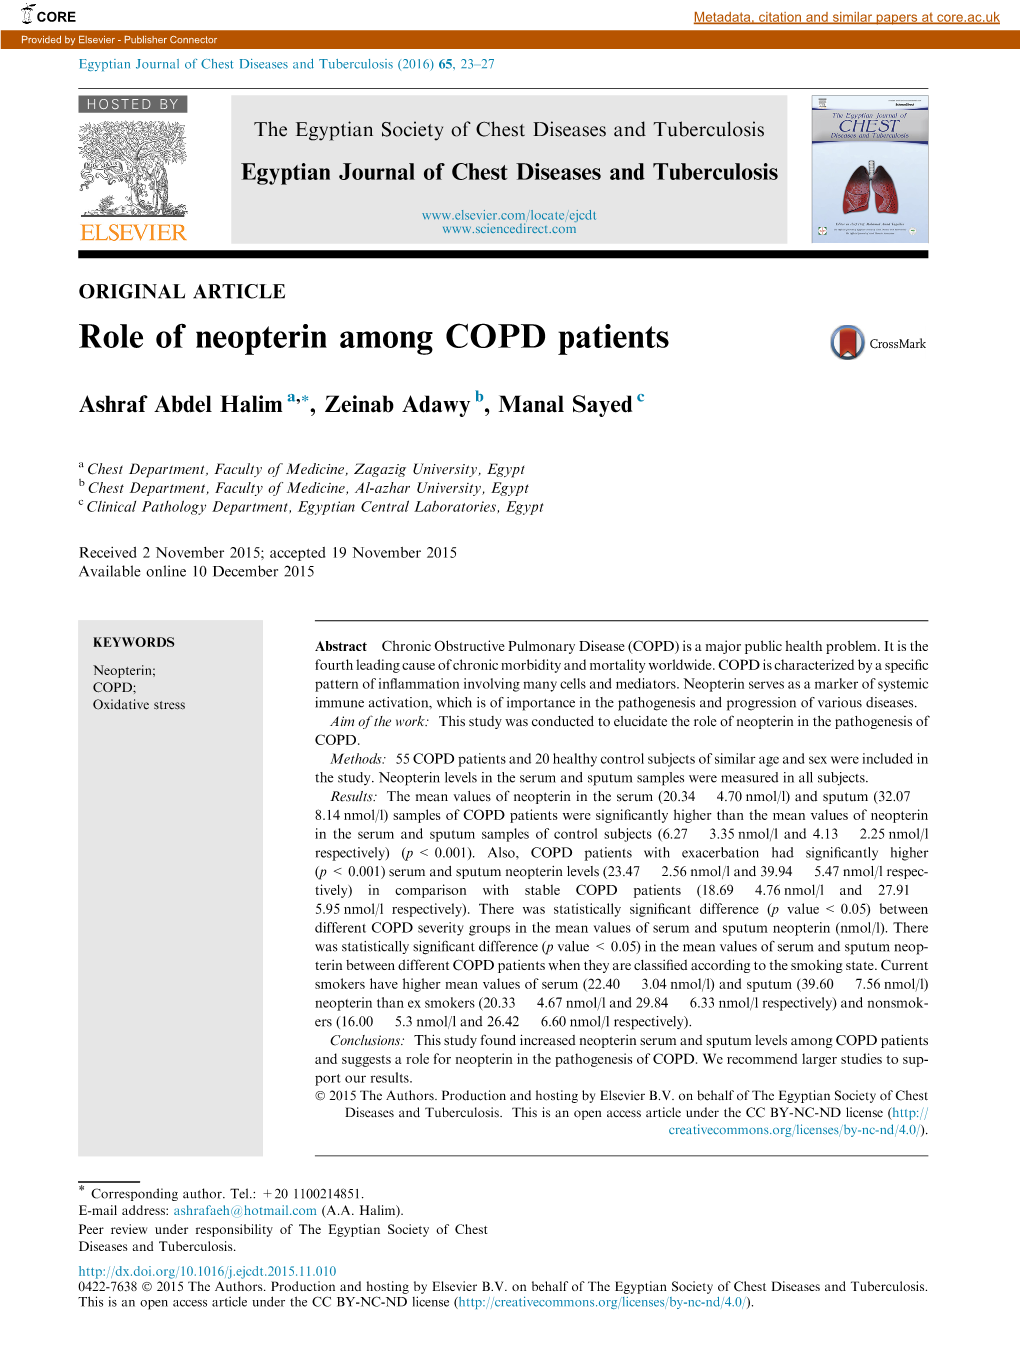 Role of Neopterin Among COPD Patients